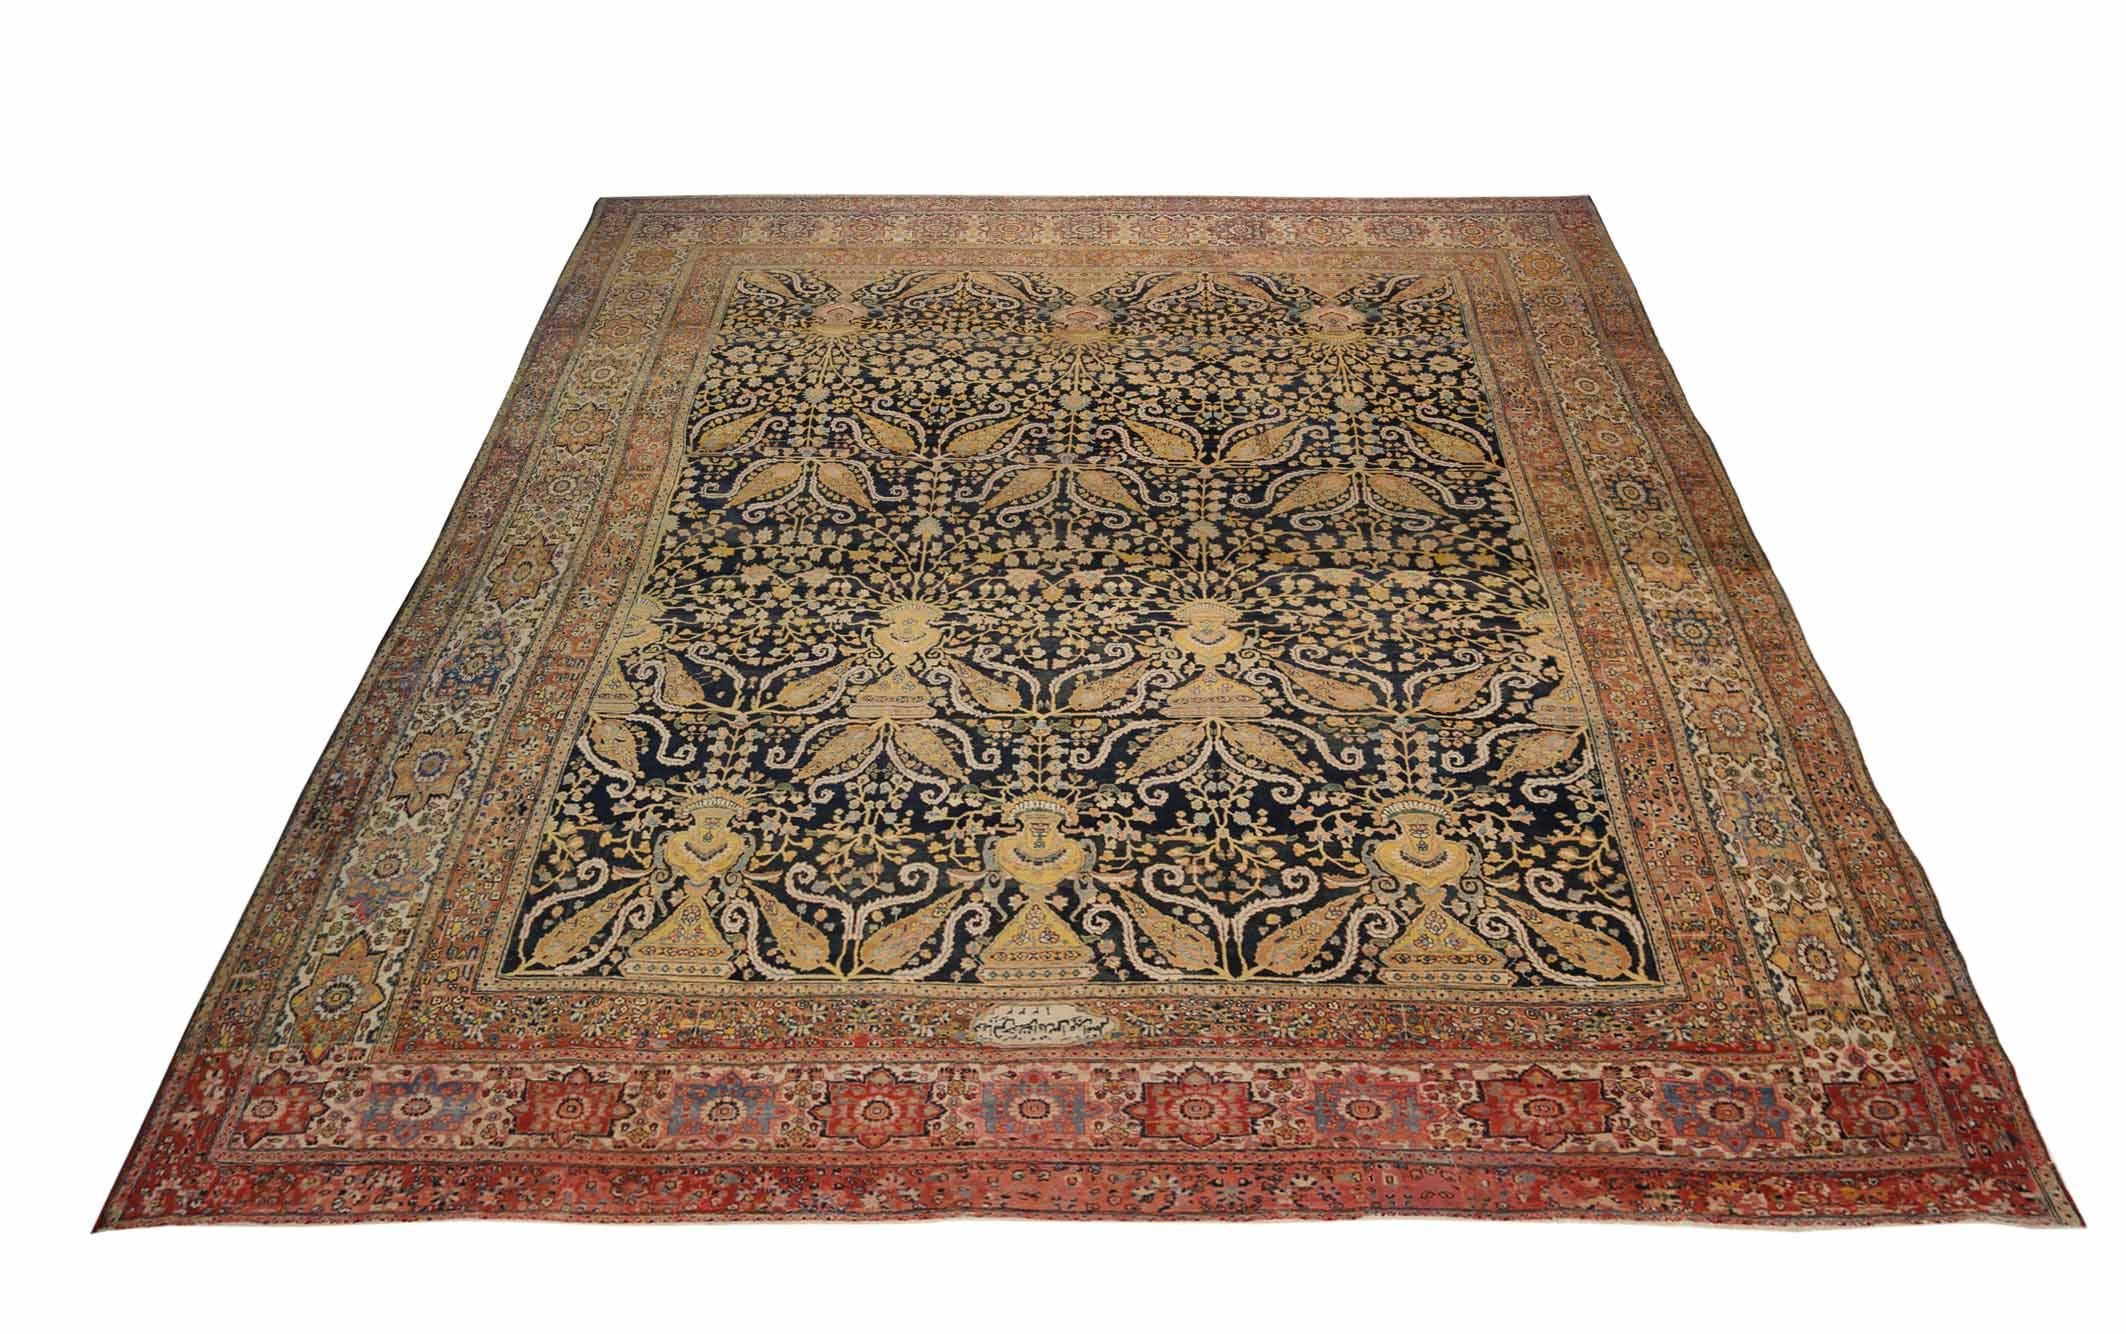 Antique area rug handwoven from the finest sheep’s wool. It’s colored with all-natural vegetable dyes that are safe for humans and pets. It’s a traditional Tabriz design handwoven by expert artisans. It’s a lovely area rug that can be incorporated